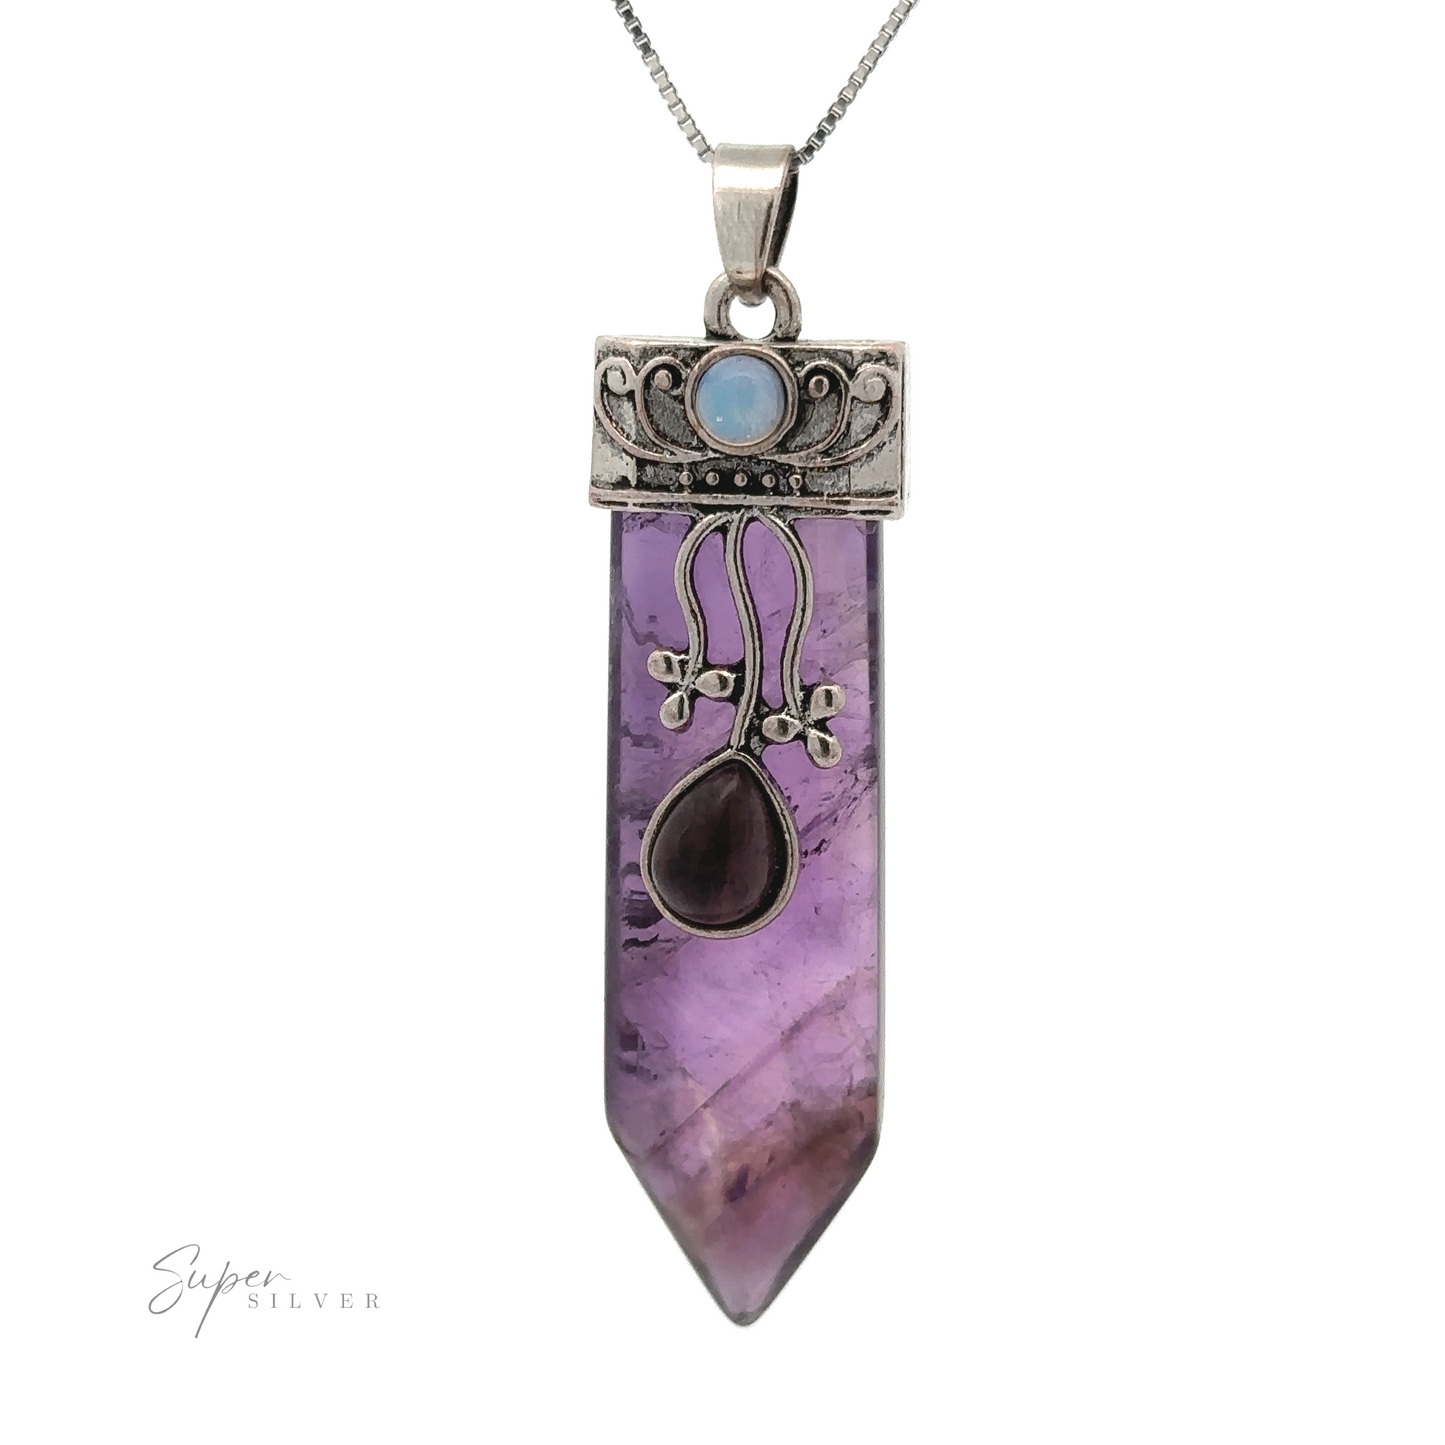 
                  
                    A silver pendant features a purple amethyst stone with a dark teardrop gem and floral embellishments on the metal setting, hanging from a silver chain. The logo "Super Silver" is visible in the bottom left corner, adding a touch of elegance to this Obelisk Crystal Stone Pendant.
                  
                